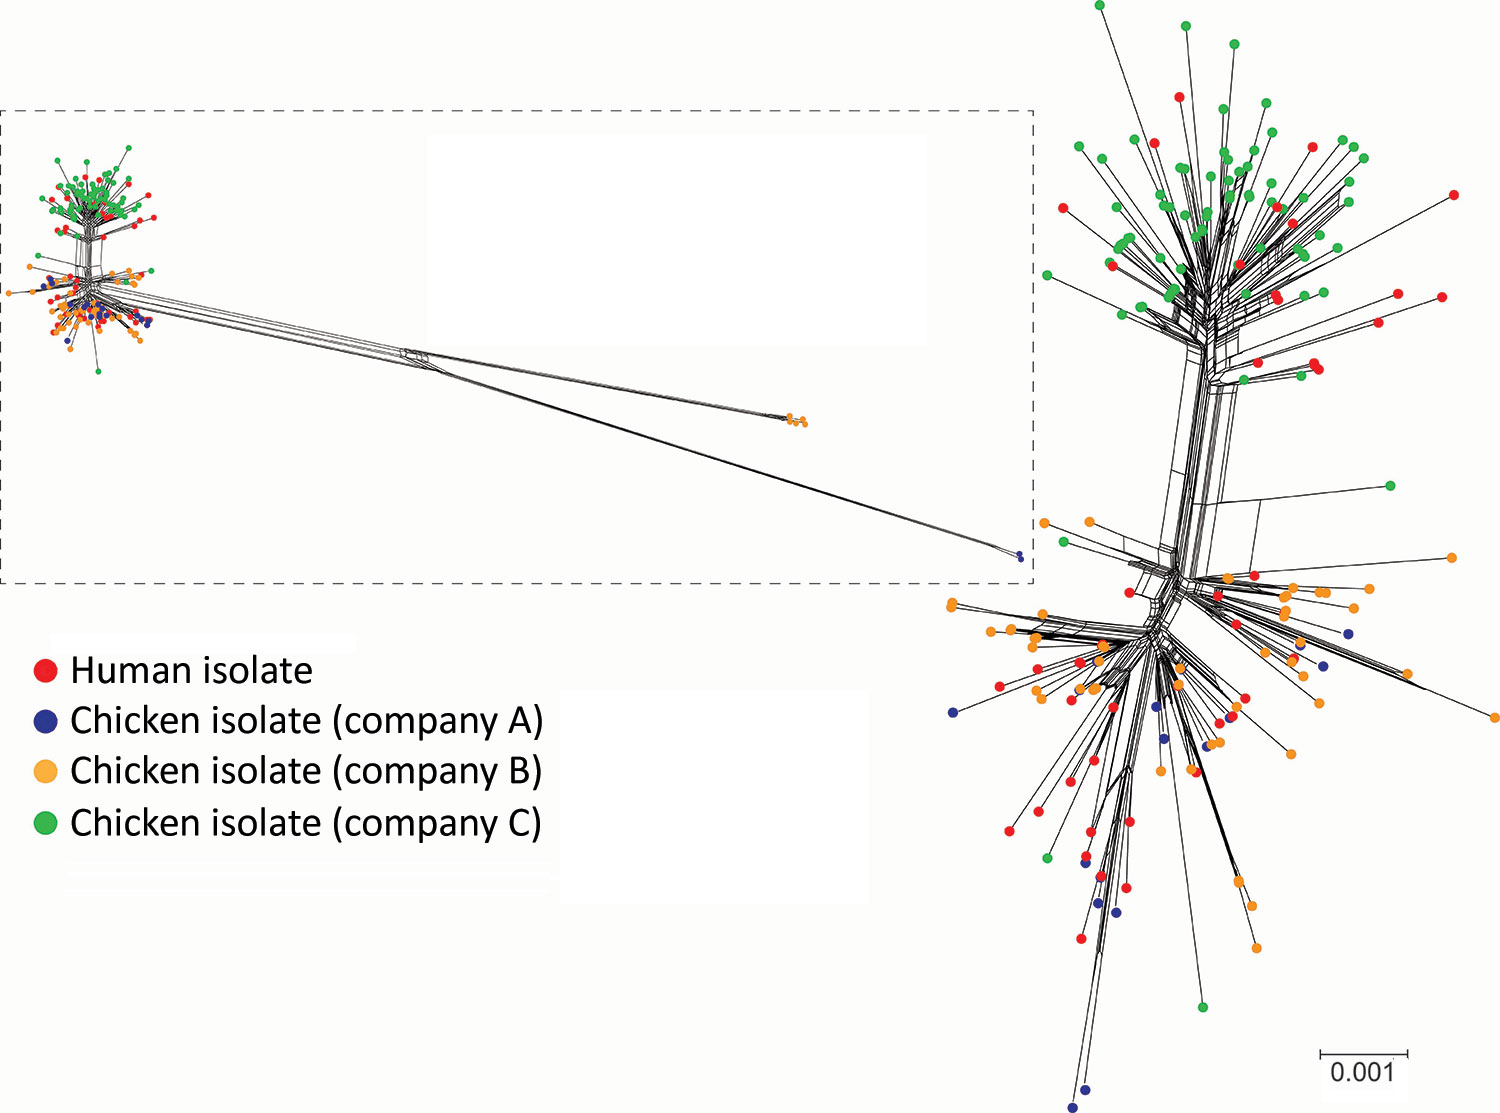 NeighborNet phylogenies generated from the allele profiles identified in the whole-genome multilocus sequence typing analysis of 227 sequence type 6964 Campylobacter jejuni isolates from humans and poultry, New Zealand, 2014–2016. The corrected NeighborNet network was generated after eliminating the 87 loci that were identified in predicted recombinant regions (Appendix Table 1). Inset shows the uncorrected NeighborNet network, generated with the original 1,363-loci allele profiles. Scale bar in